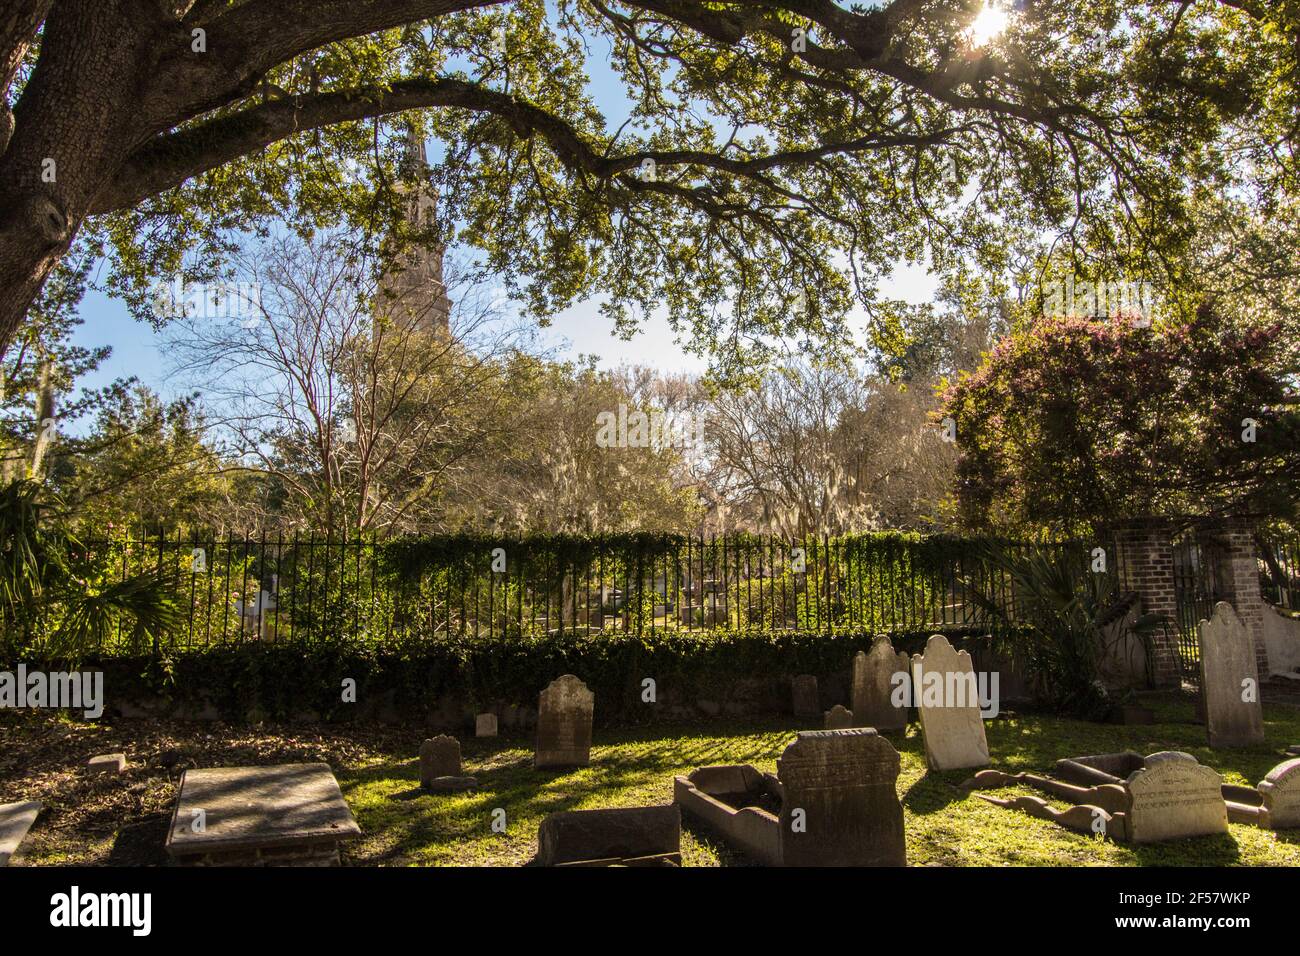 Charleston, South Carolina, USA - February 23, 2021: Exterior of the Circular Congregational Church and graveyard. The cemetery has graves from 1700s Stock Photo